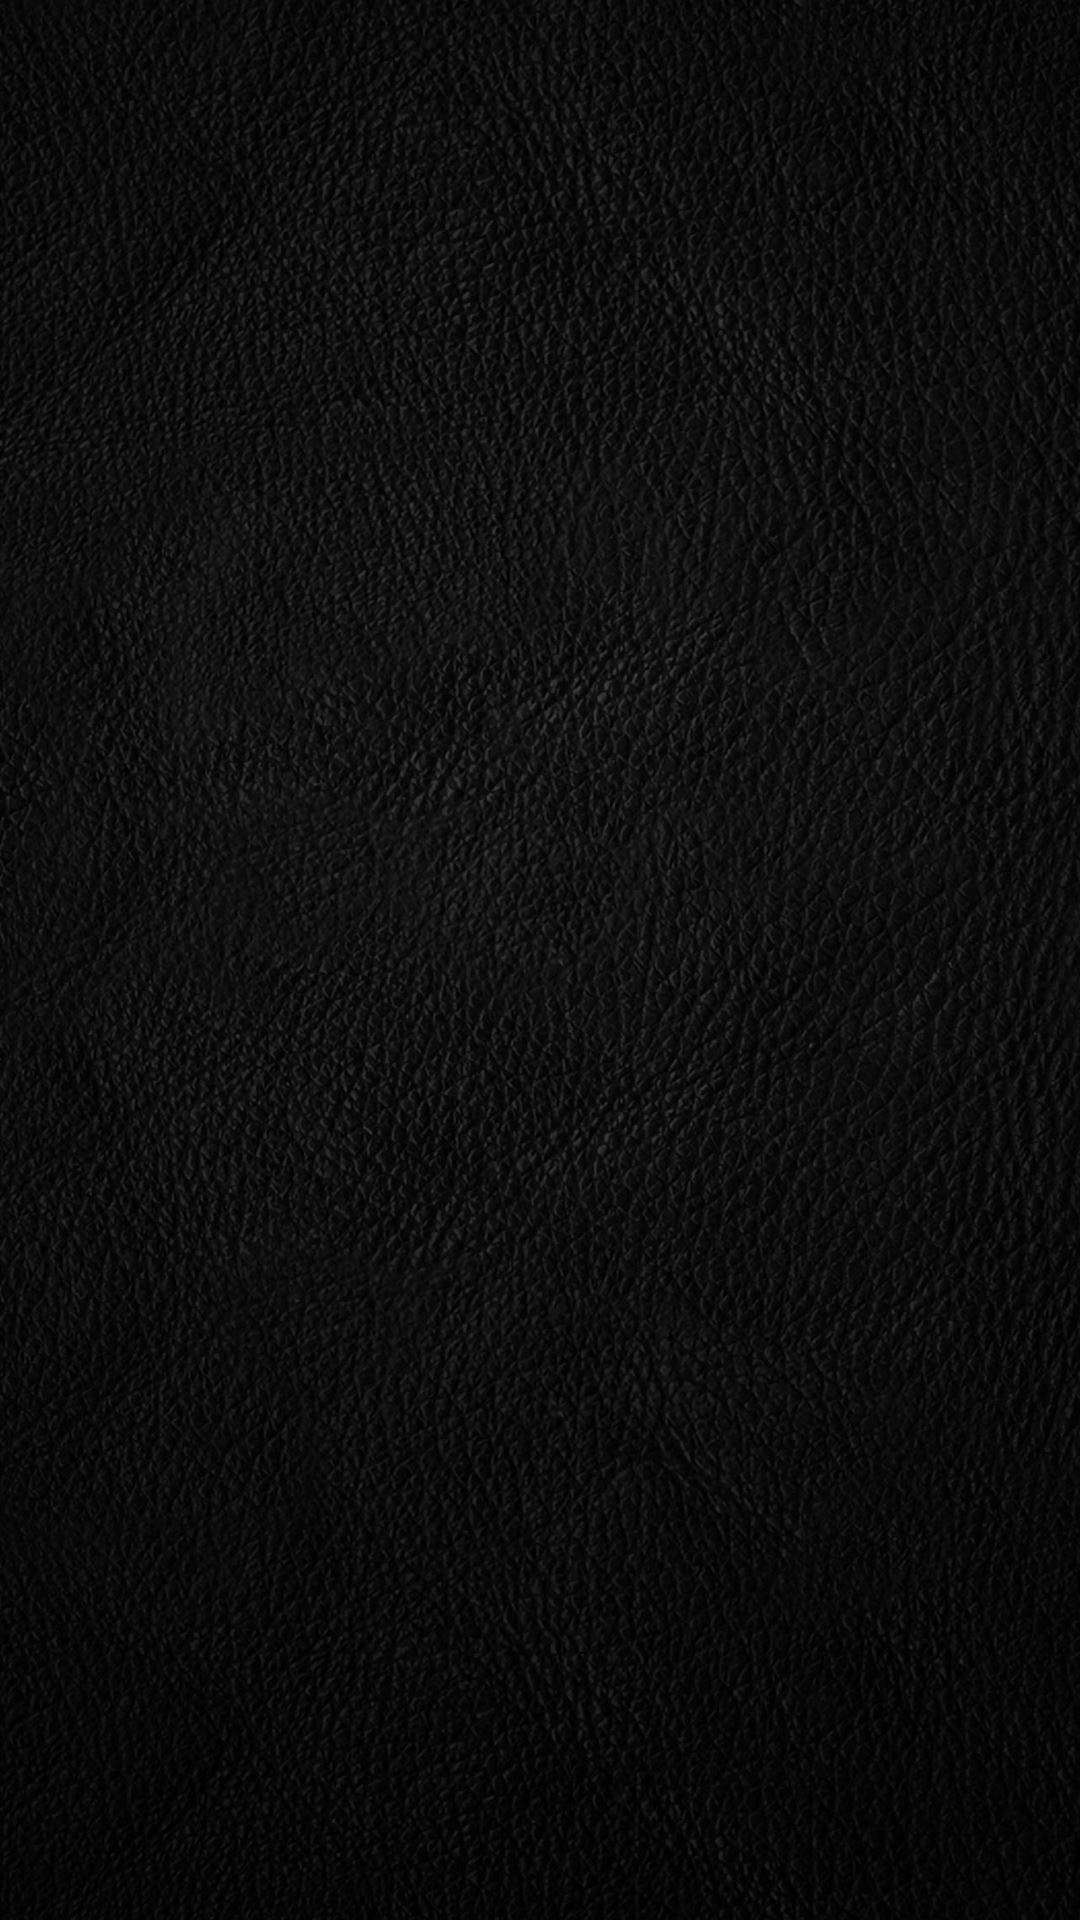 Black leather iPhone Wallpapers Free Download